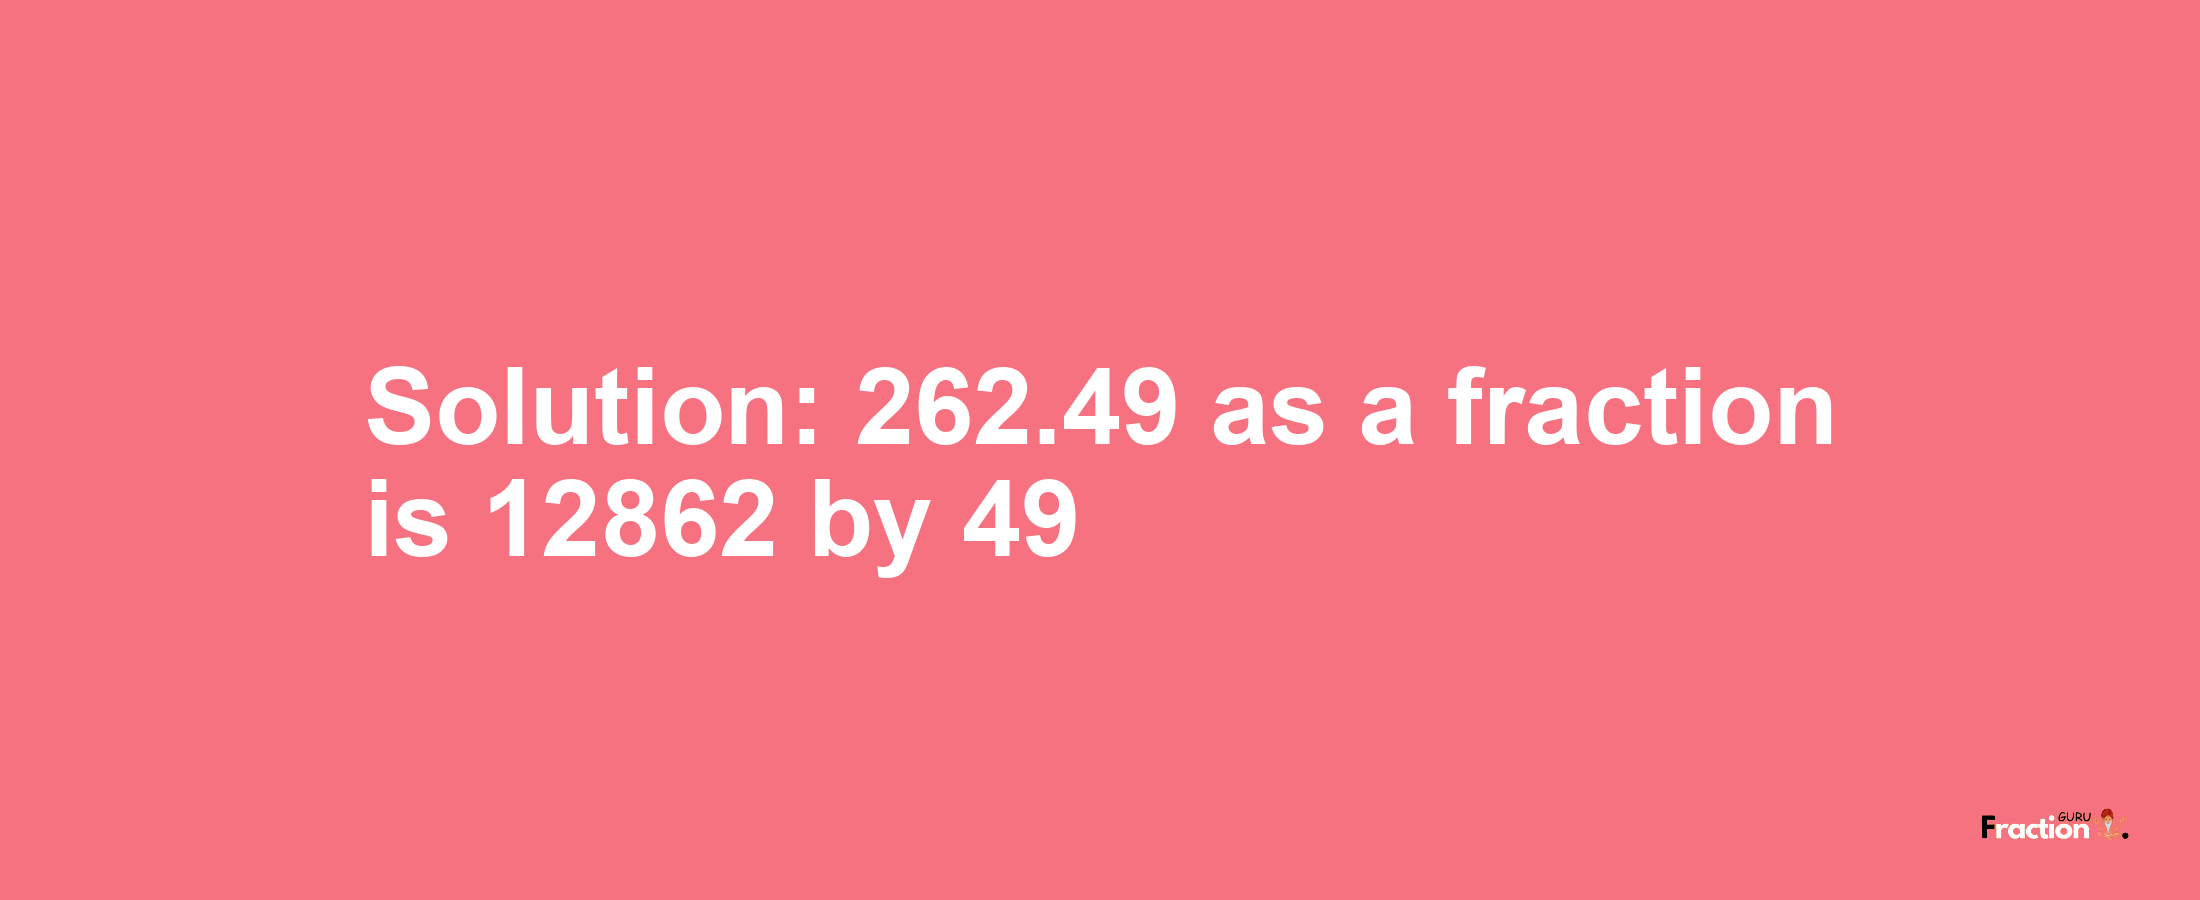 Solution:262.49 as a fraction is 12862/49